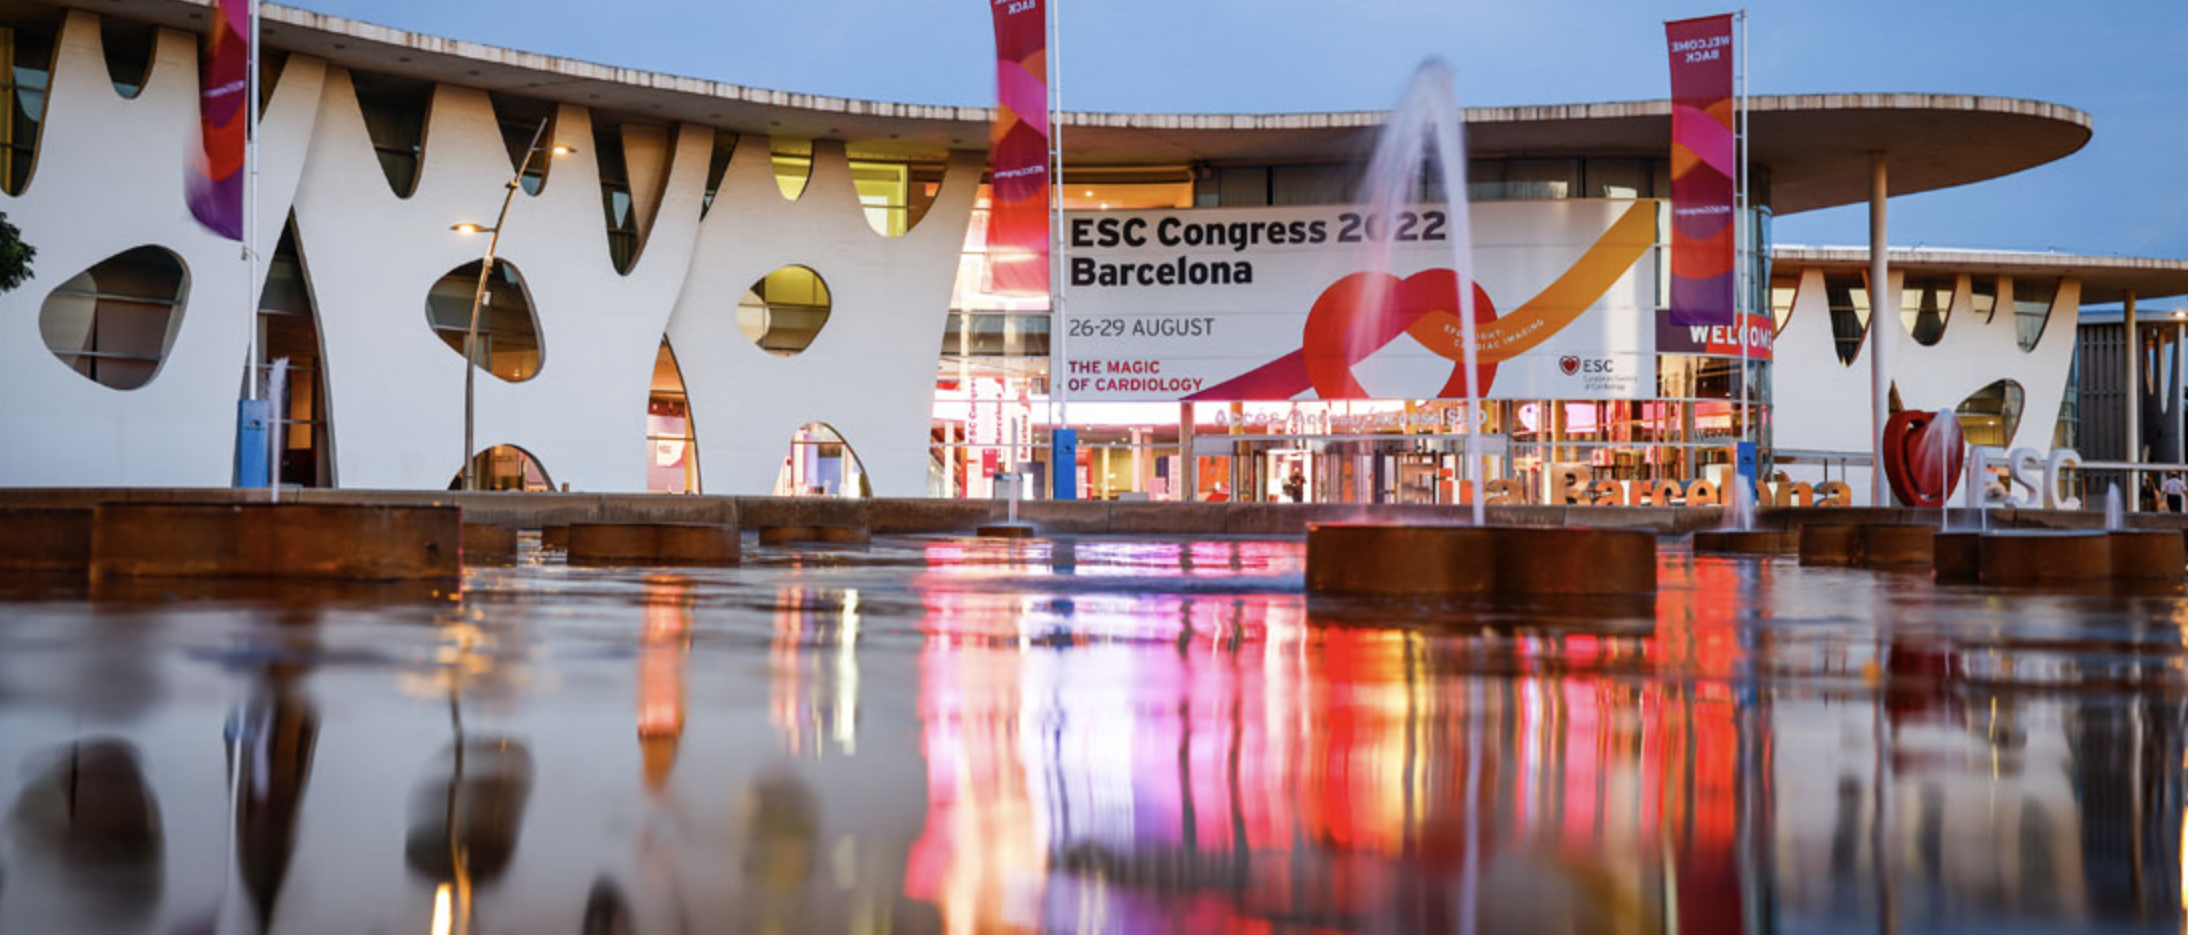 Esc Congress 2022 Abstract Submission